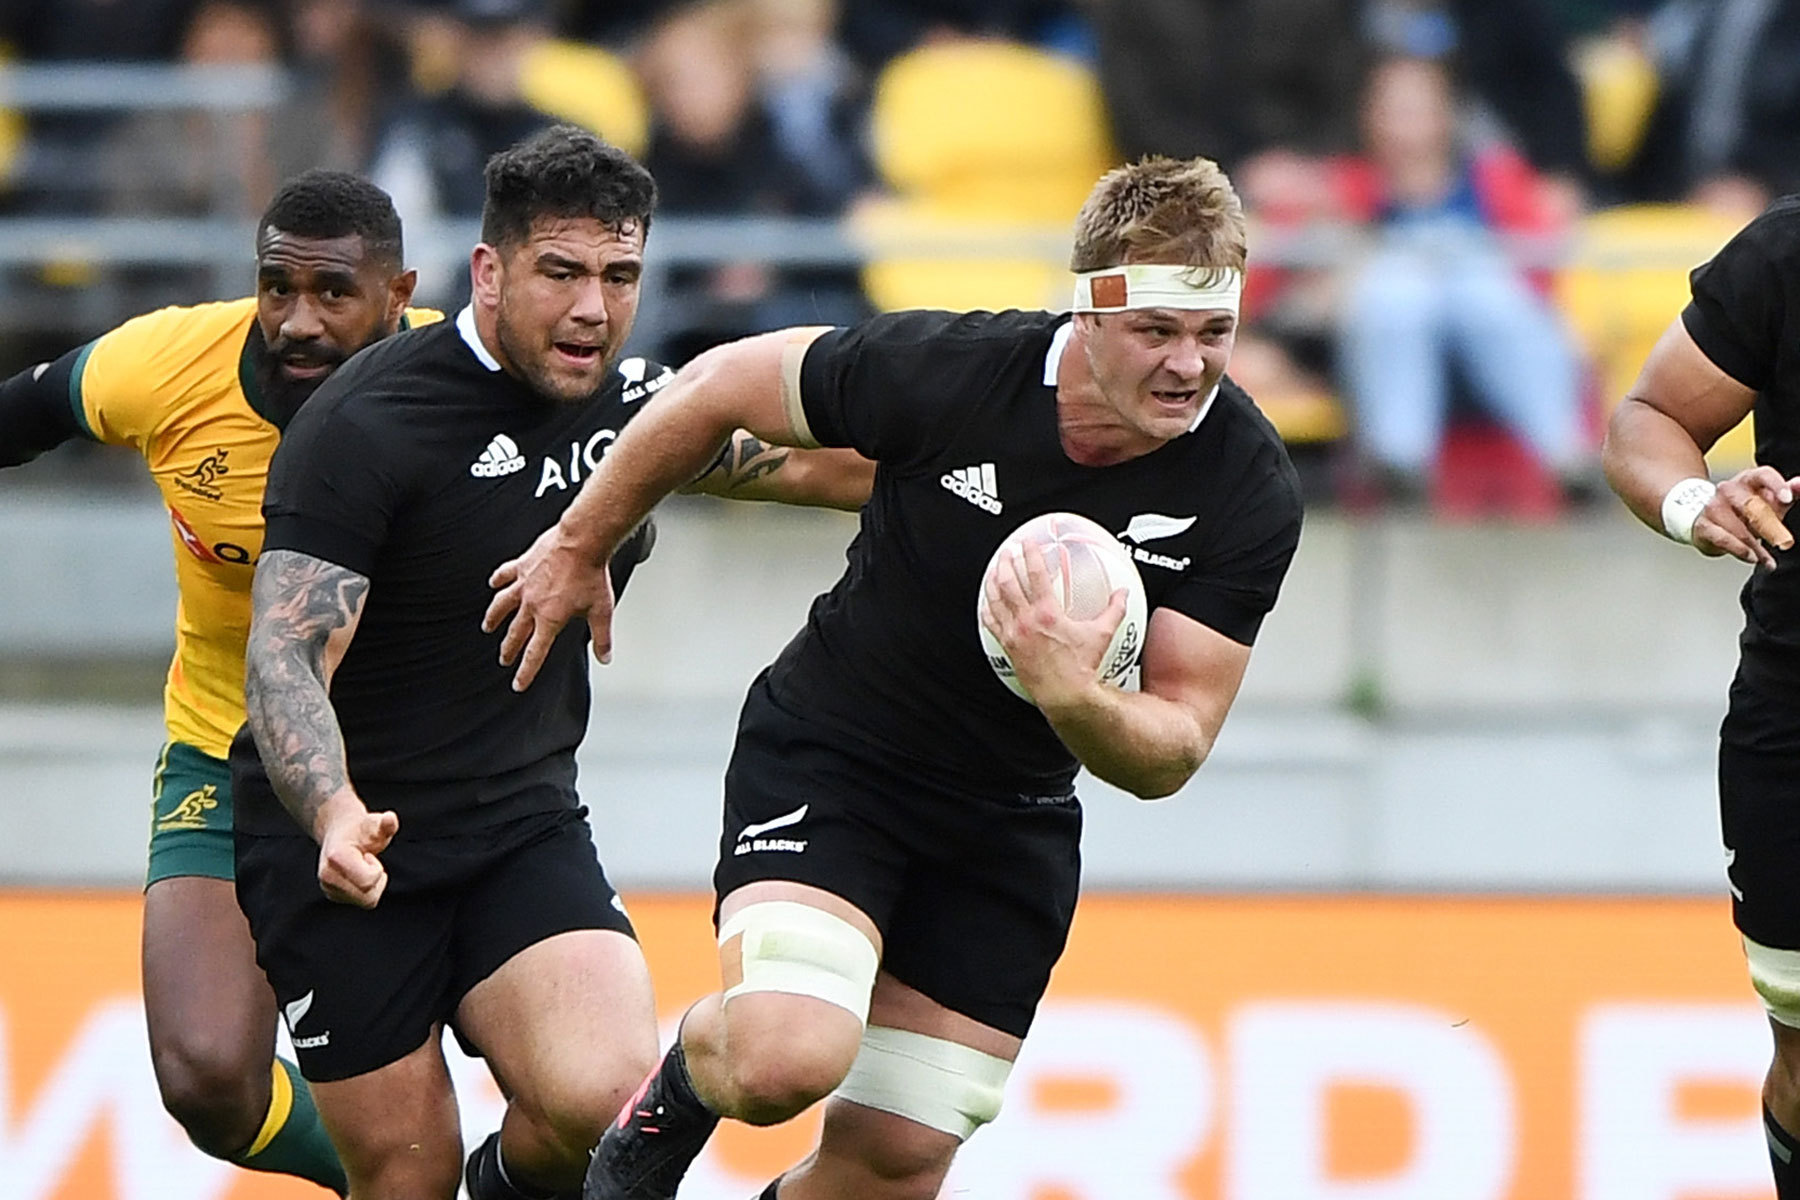 All Blacks v Australia Kickoff time, how to watch in NZ, live streaming, teams, odds - all you need to know